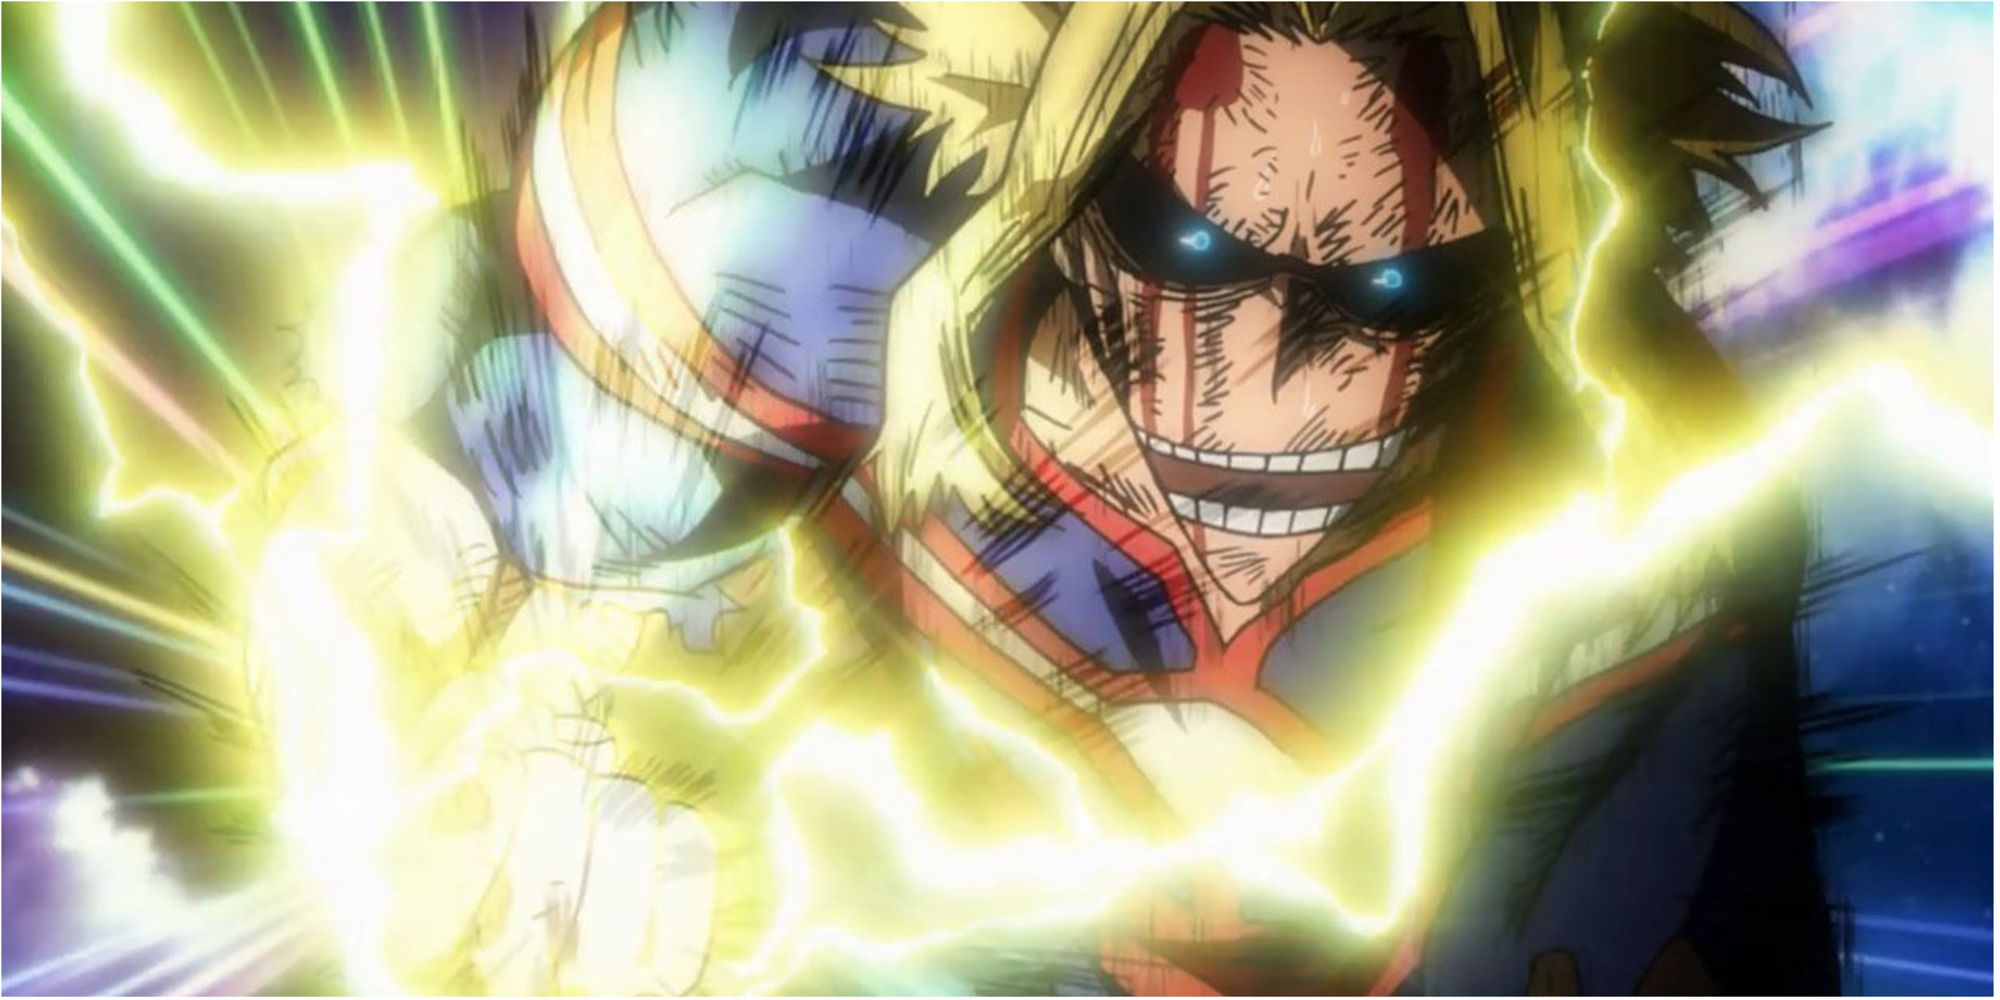 All Might wages war with All For One in My Hero Academia Season 3